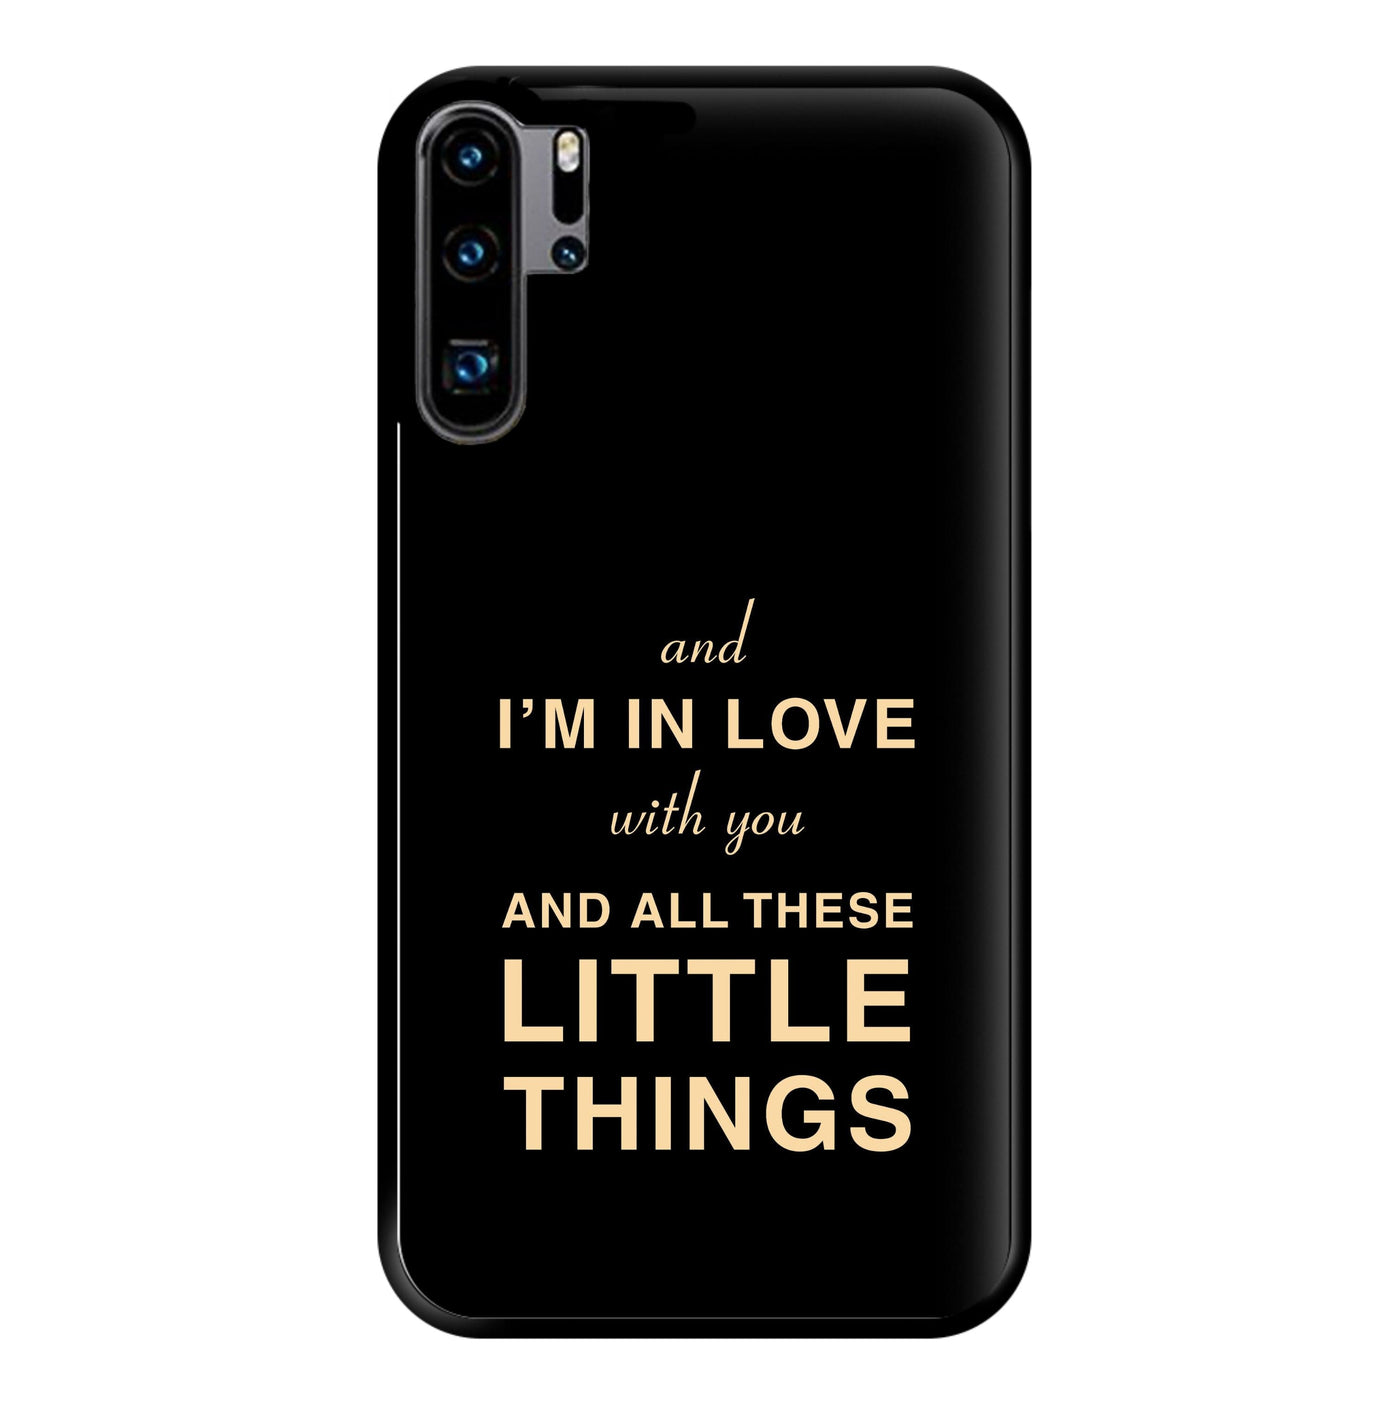 Little Things - One Direction Phone Case